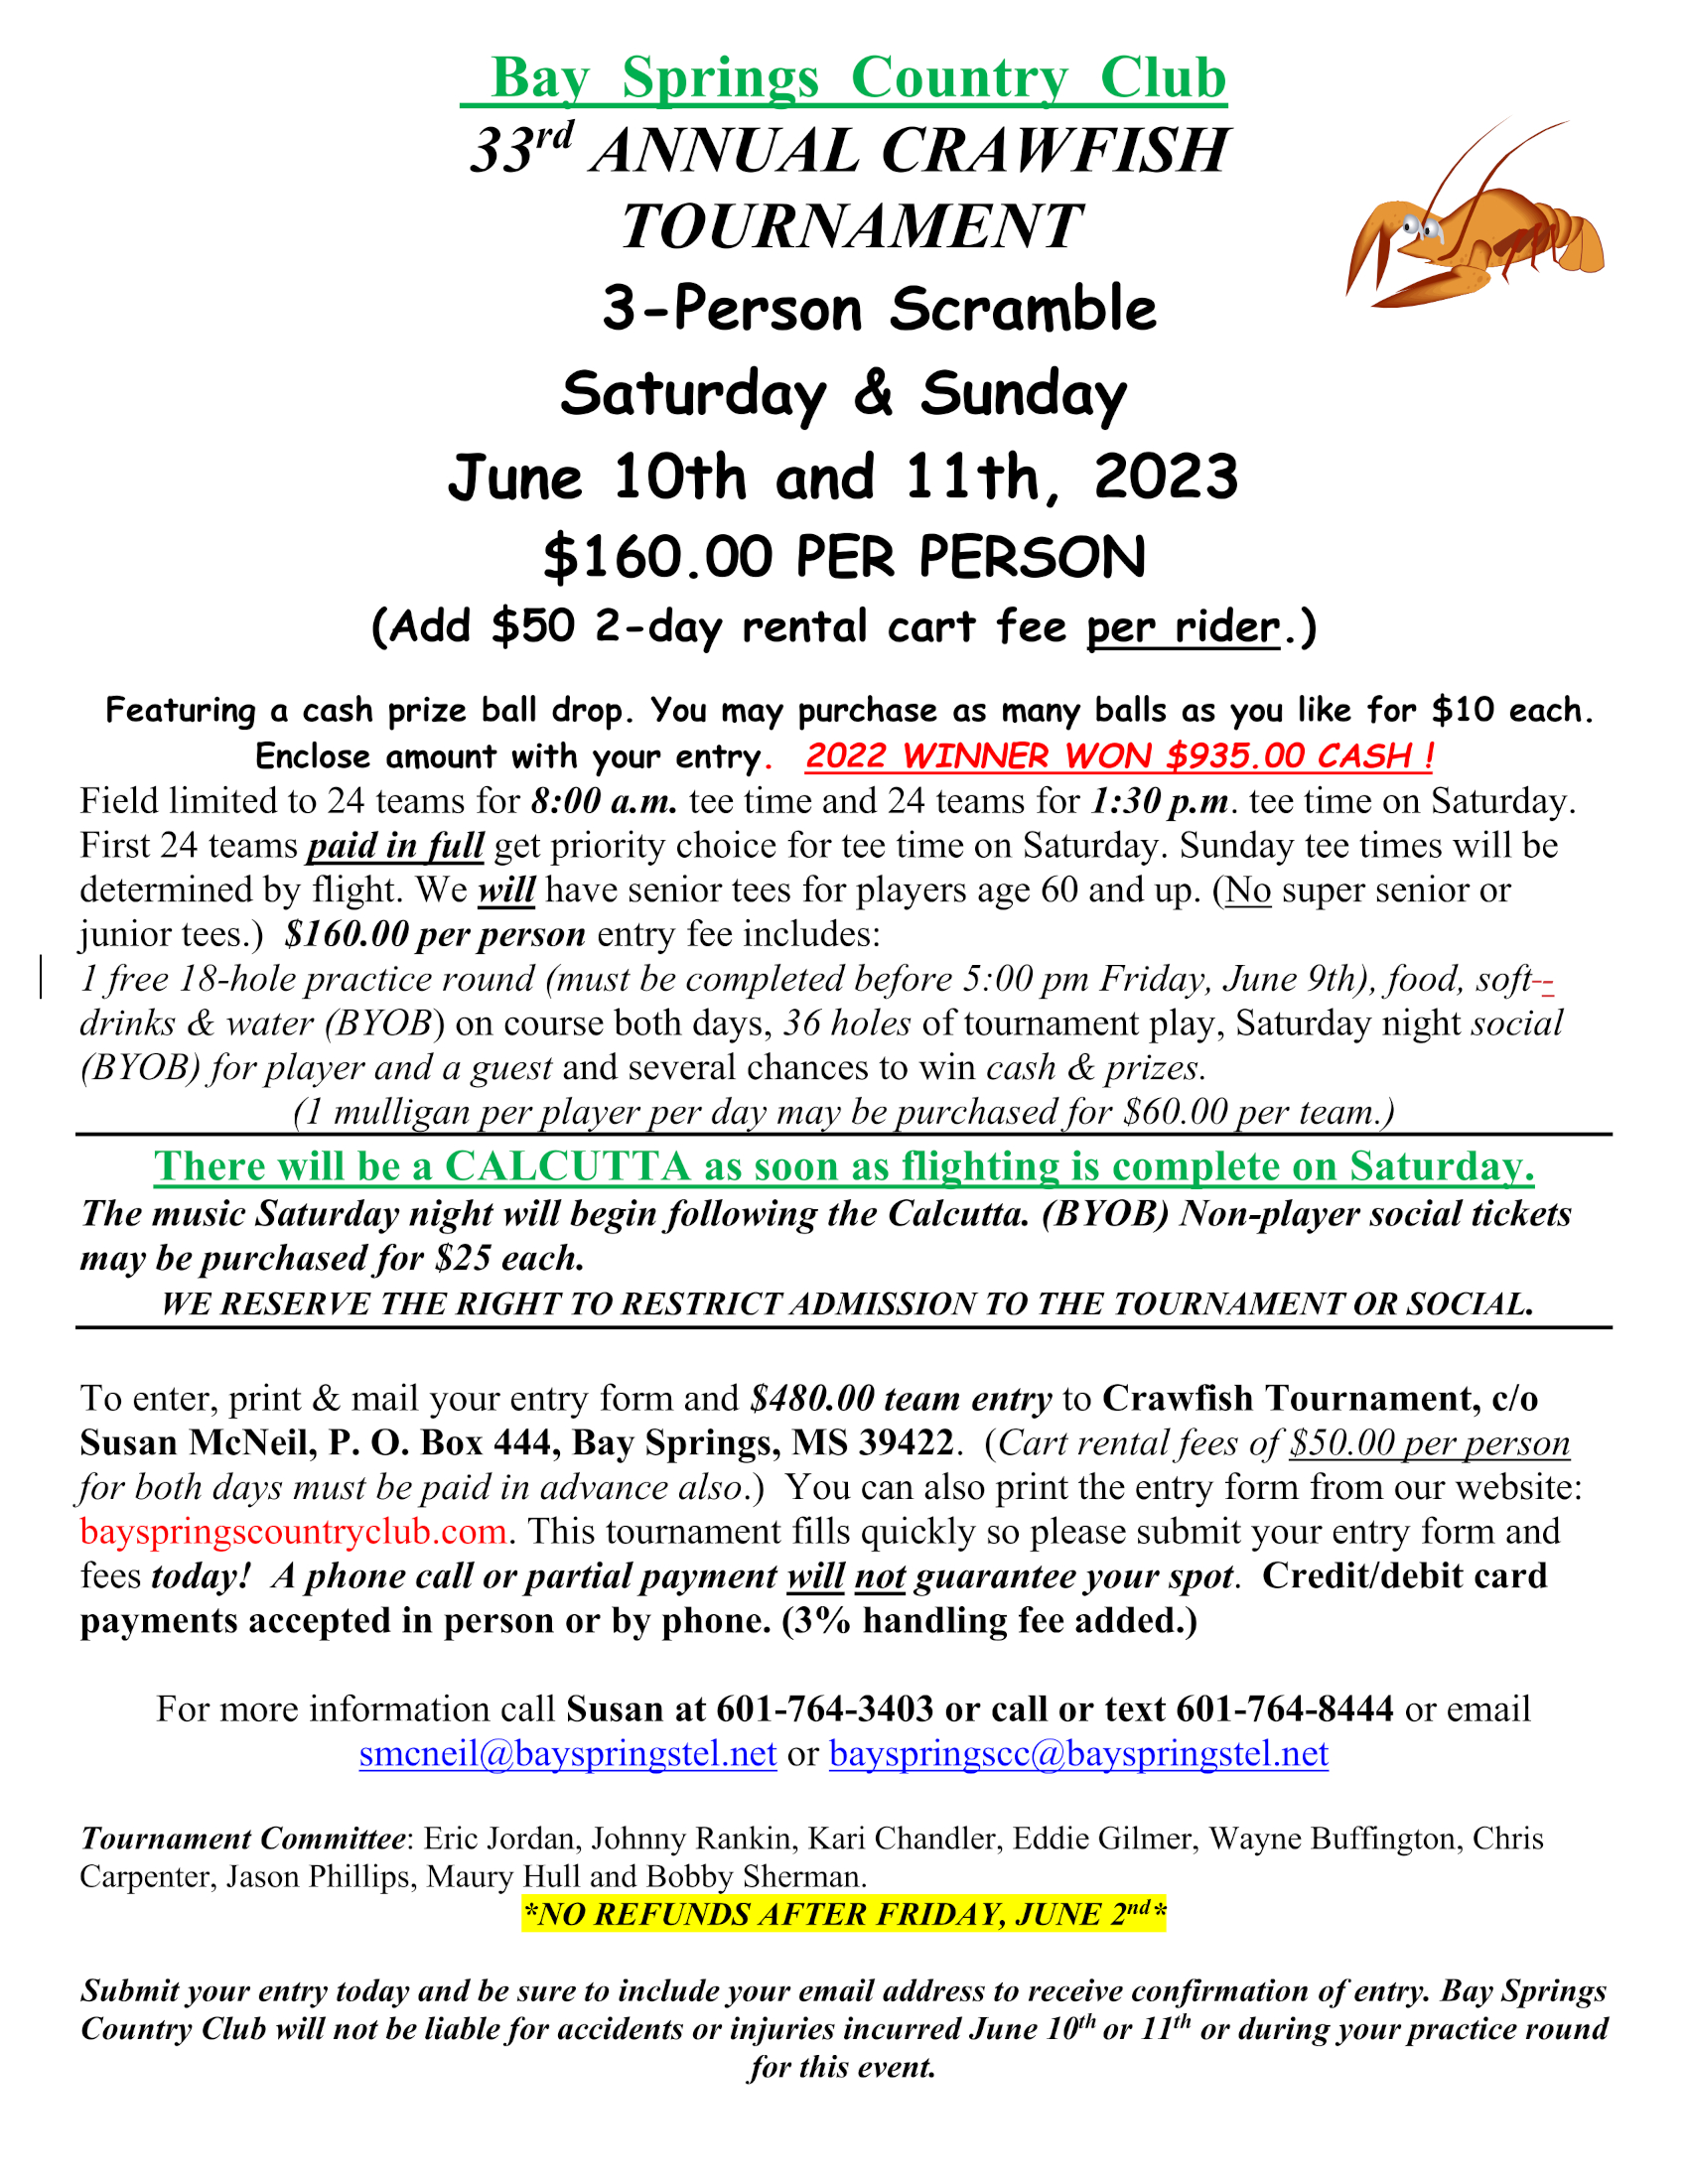 33rd Annual Crawfish Tournament 3-Person Scramble Flyer & Entry Form